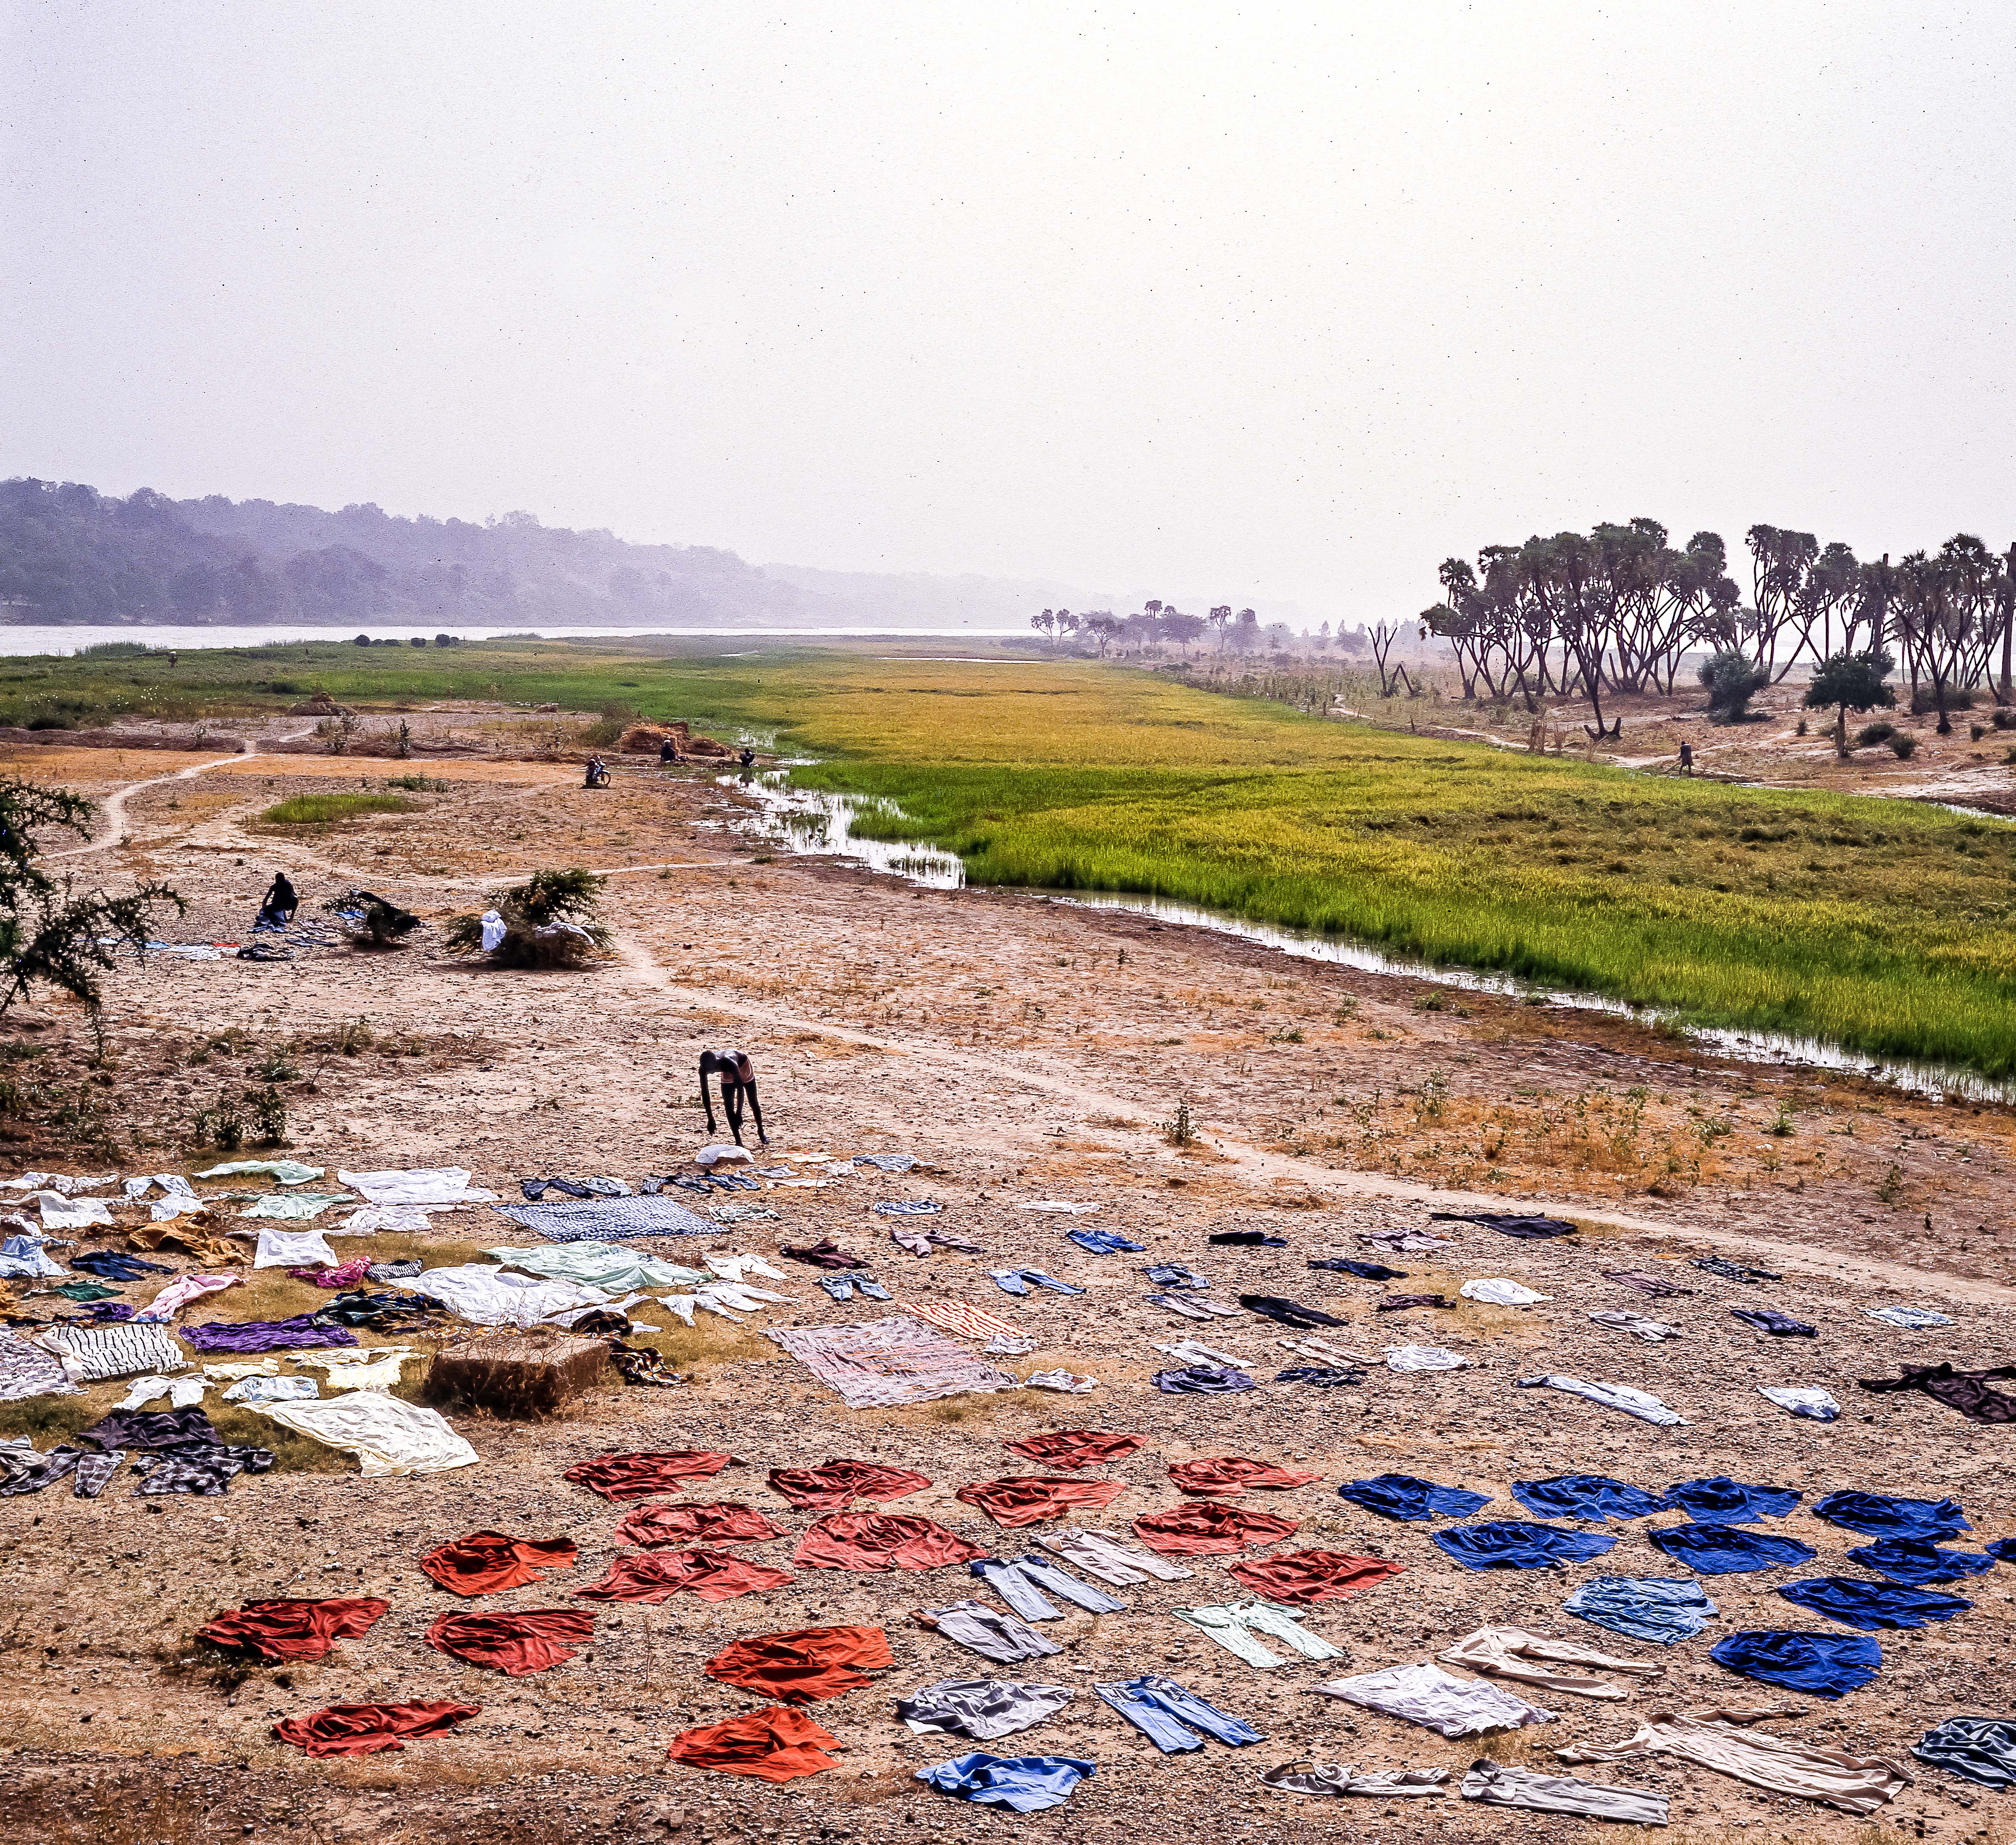 Niger, Niamey, Clothes Washer On Niger River, 1988